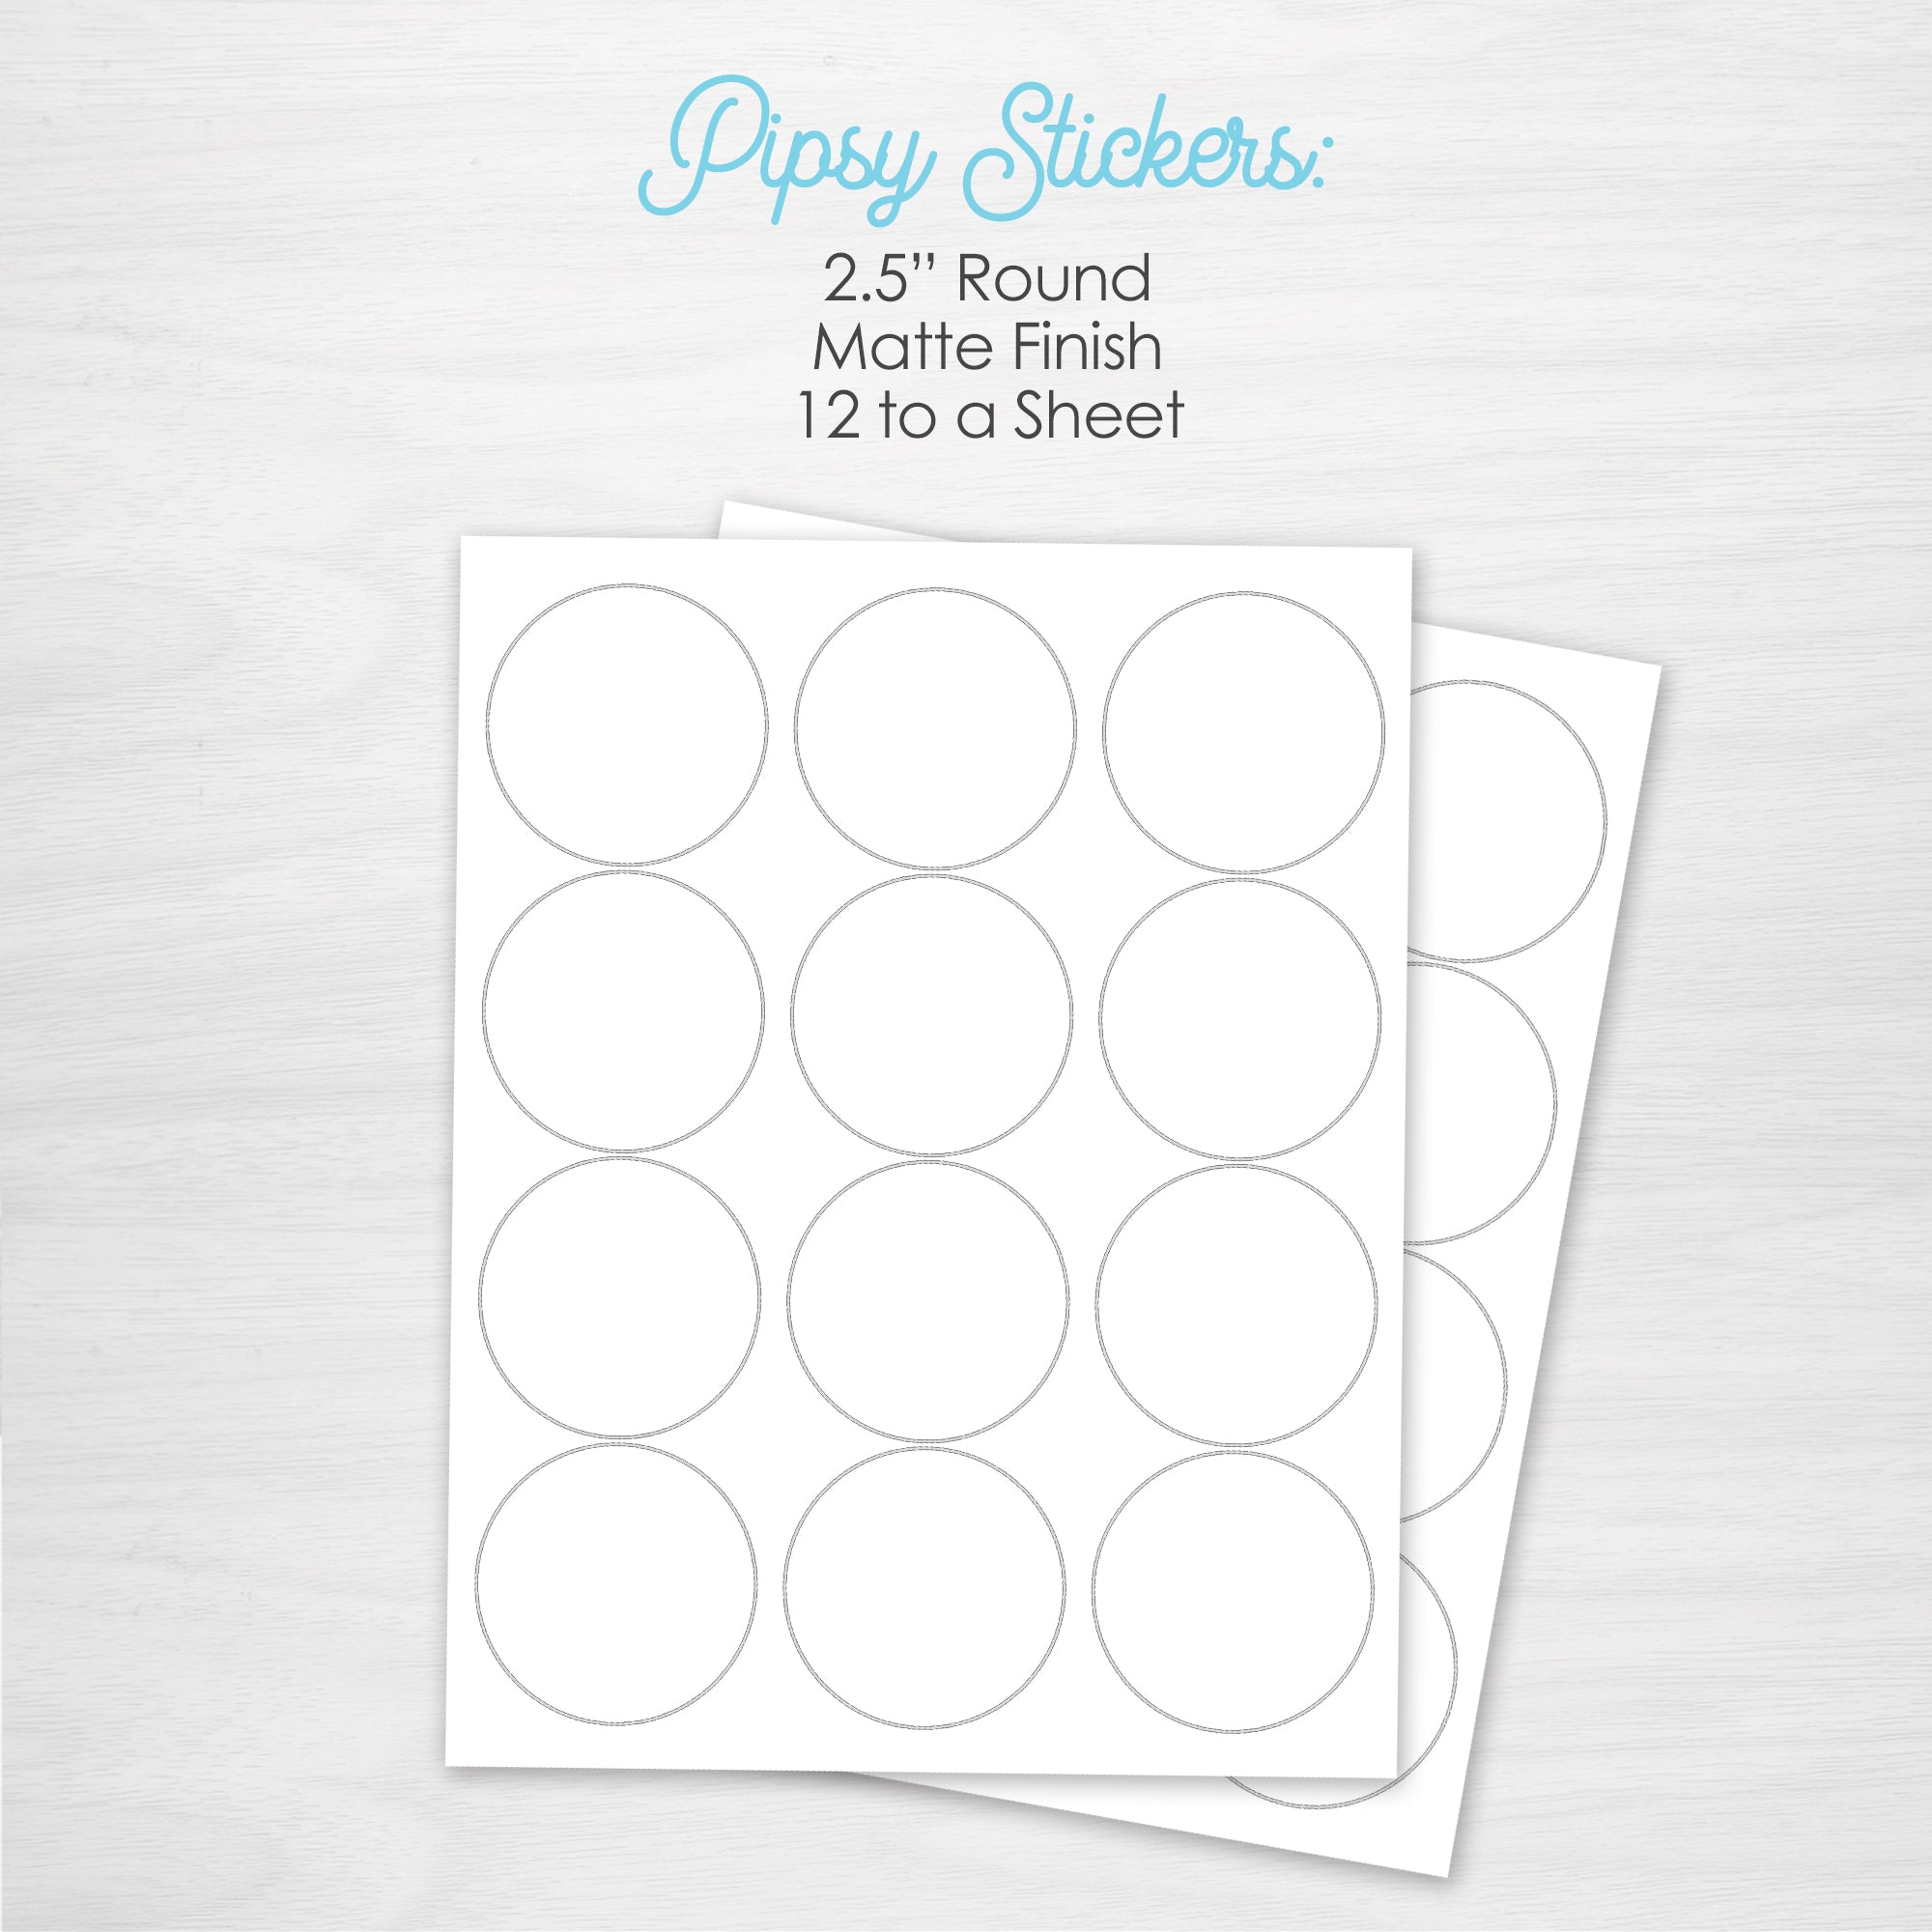 Round matte 2.5" stickers | 12 per sheet or print at home digital file